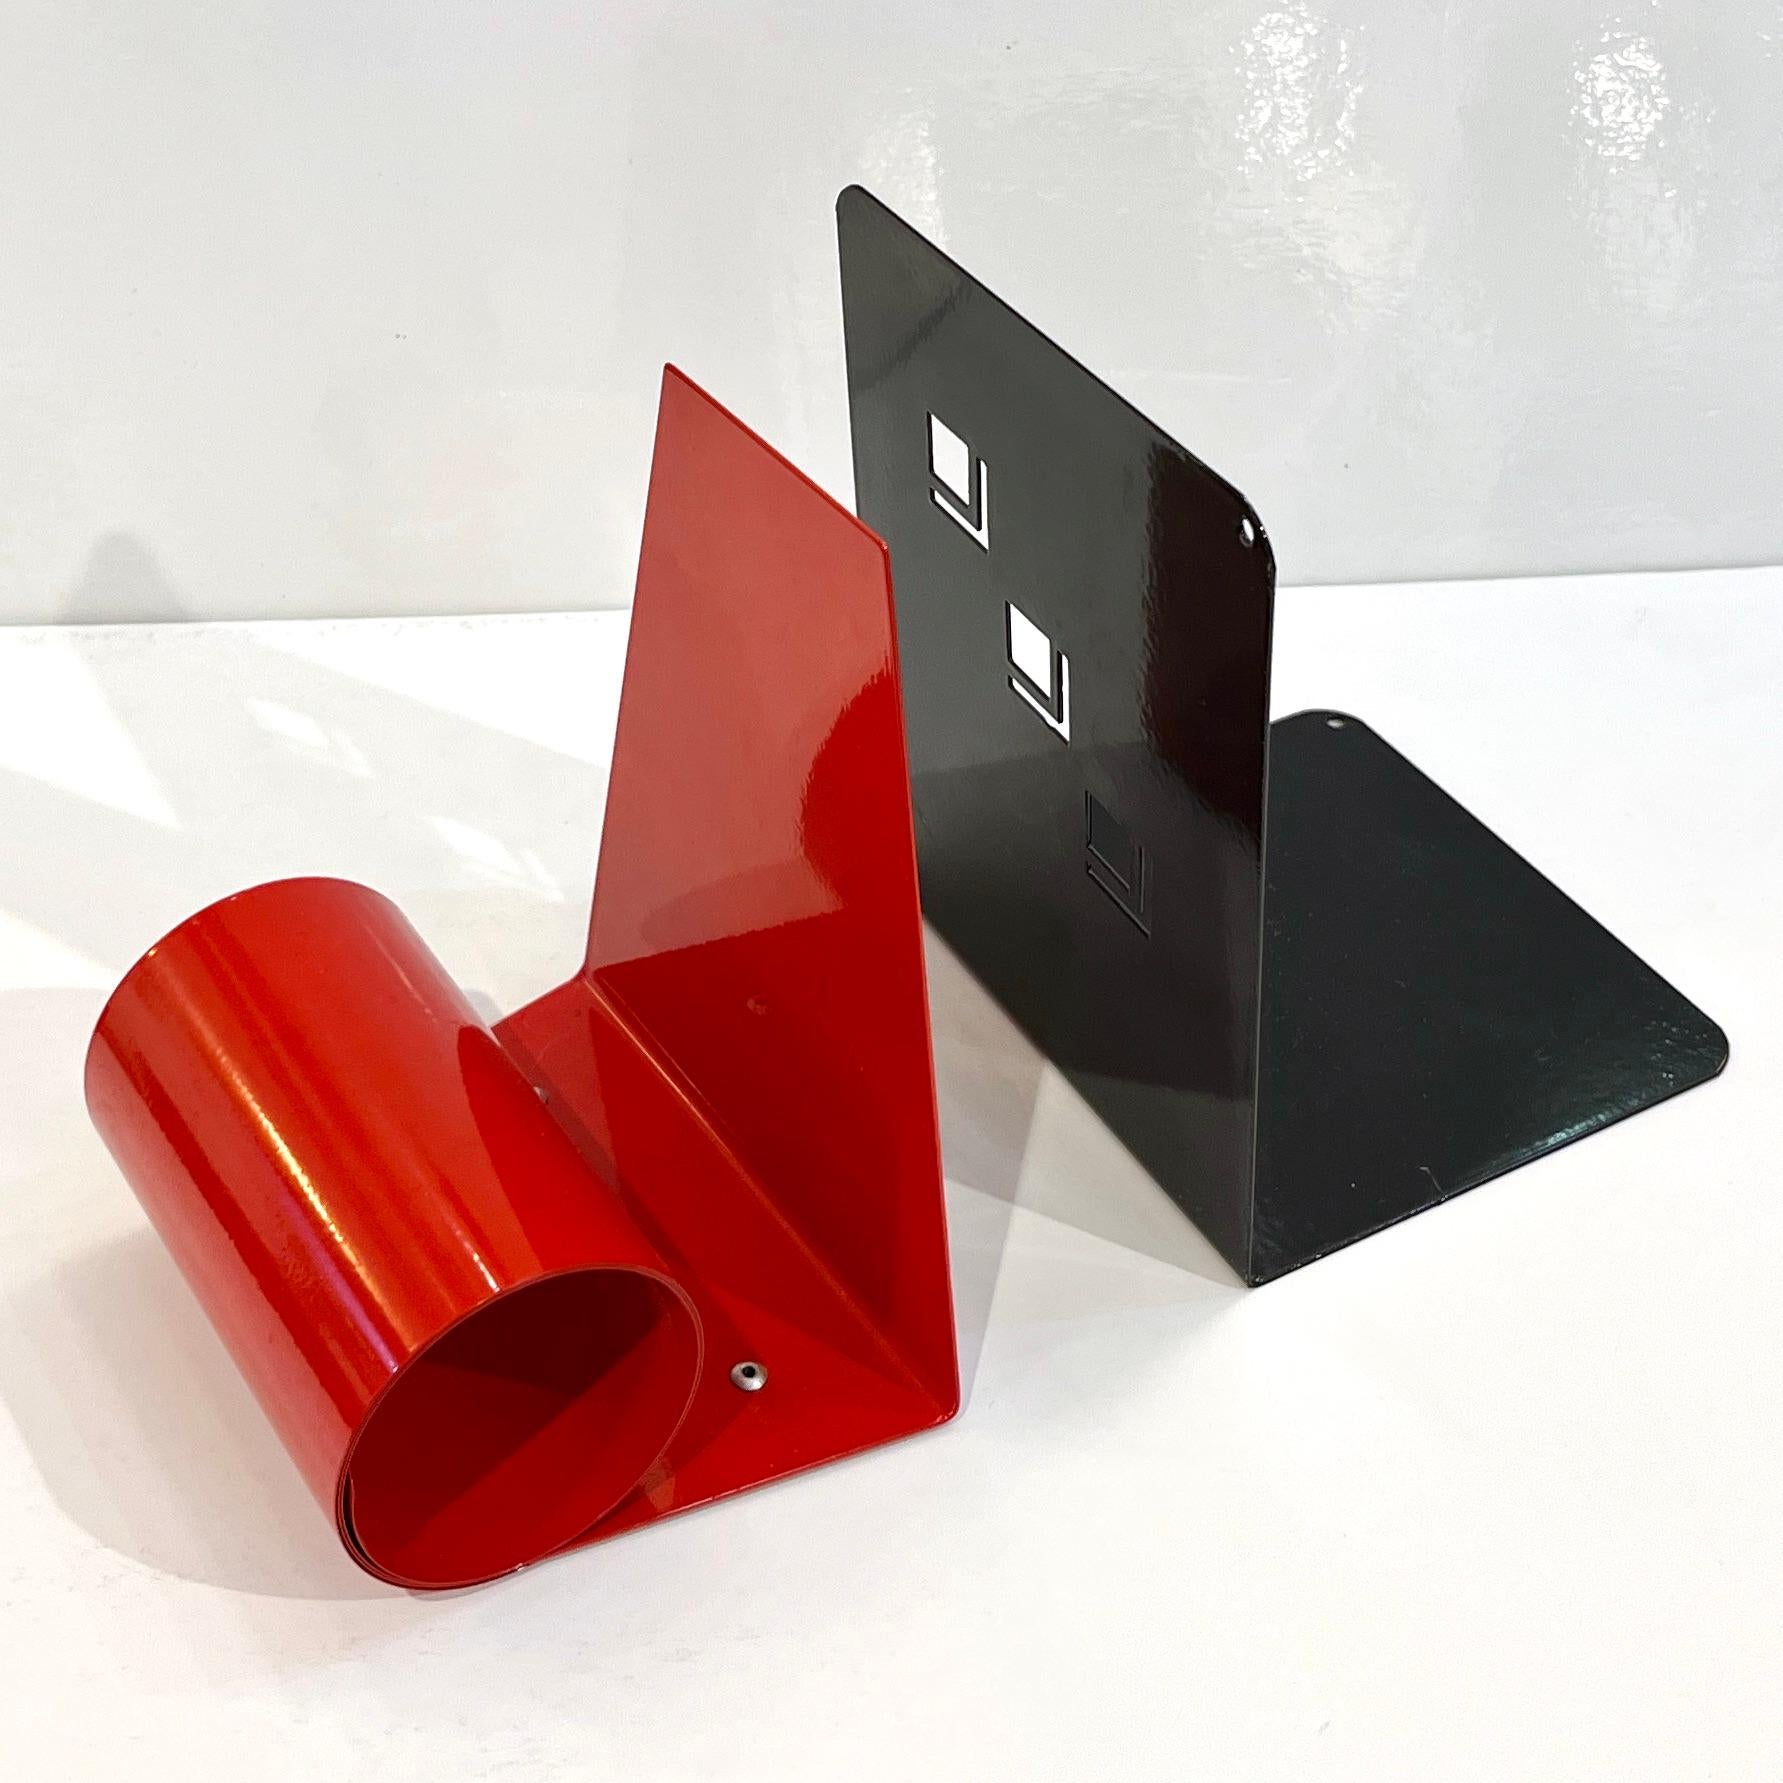 1970s Italian Vintage Red & Black Lacquered Metal Post-Modern Geometric Bookends For Sale 3